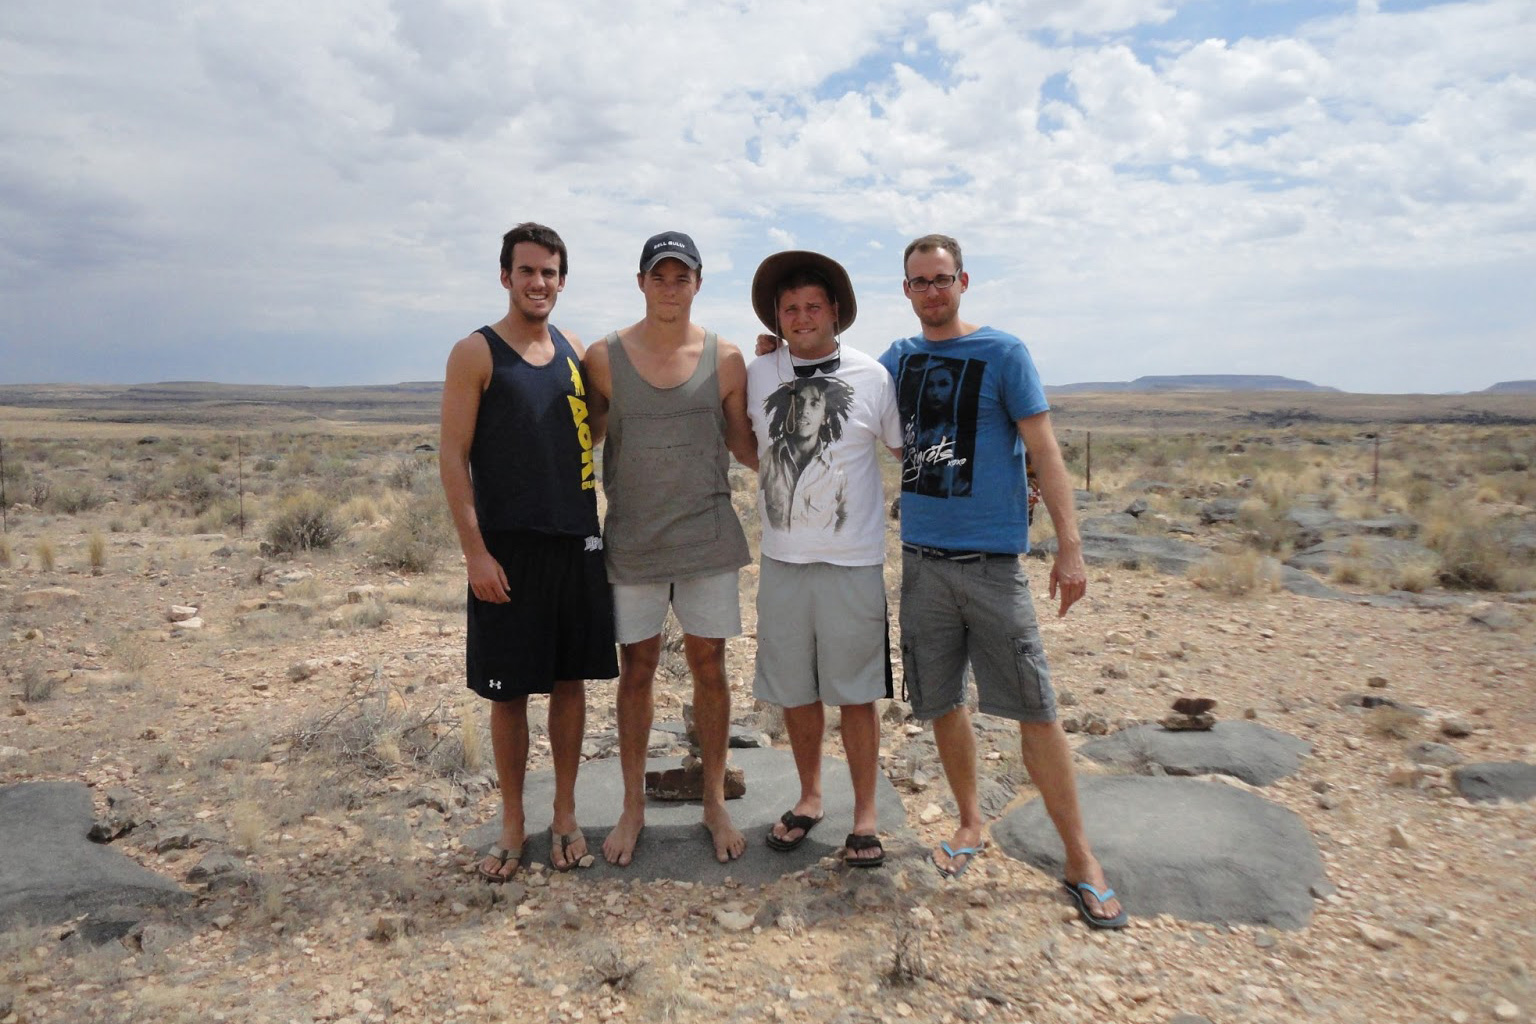 Four students stand in desert landscape